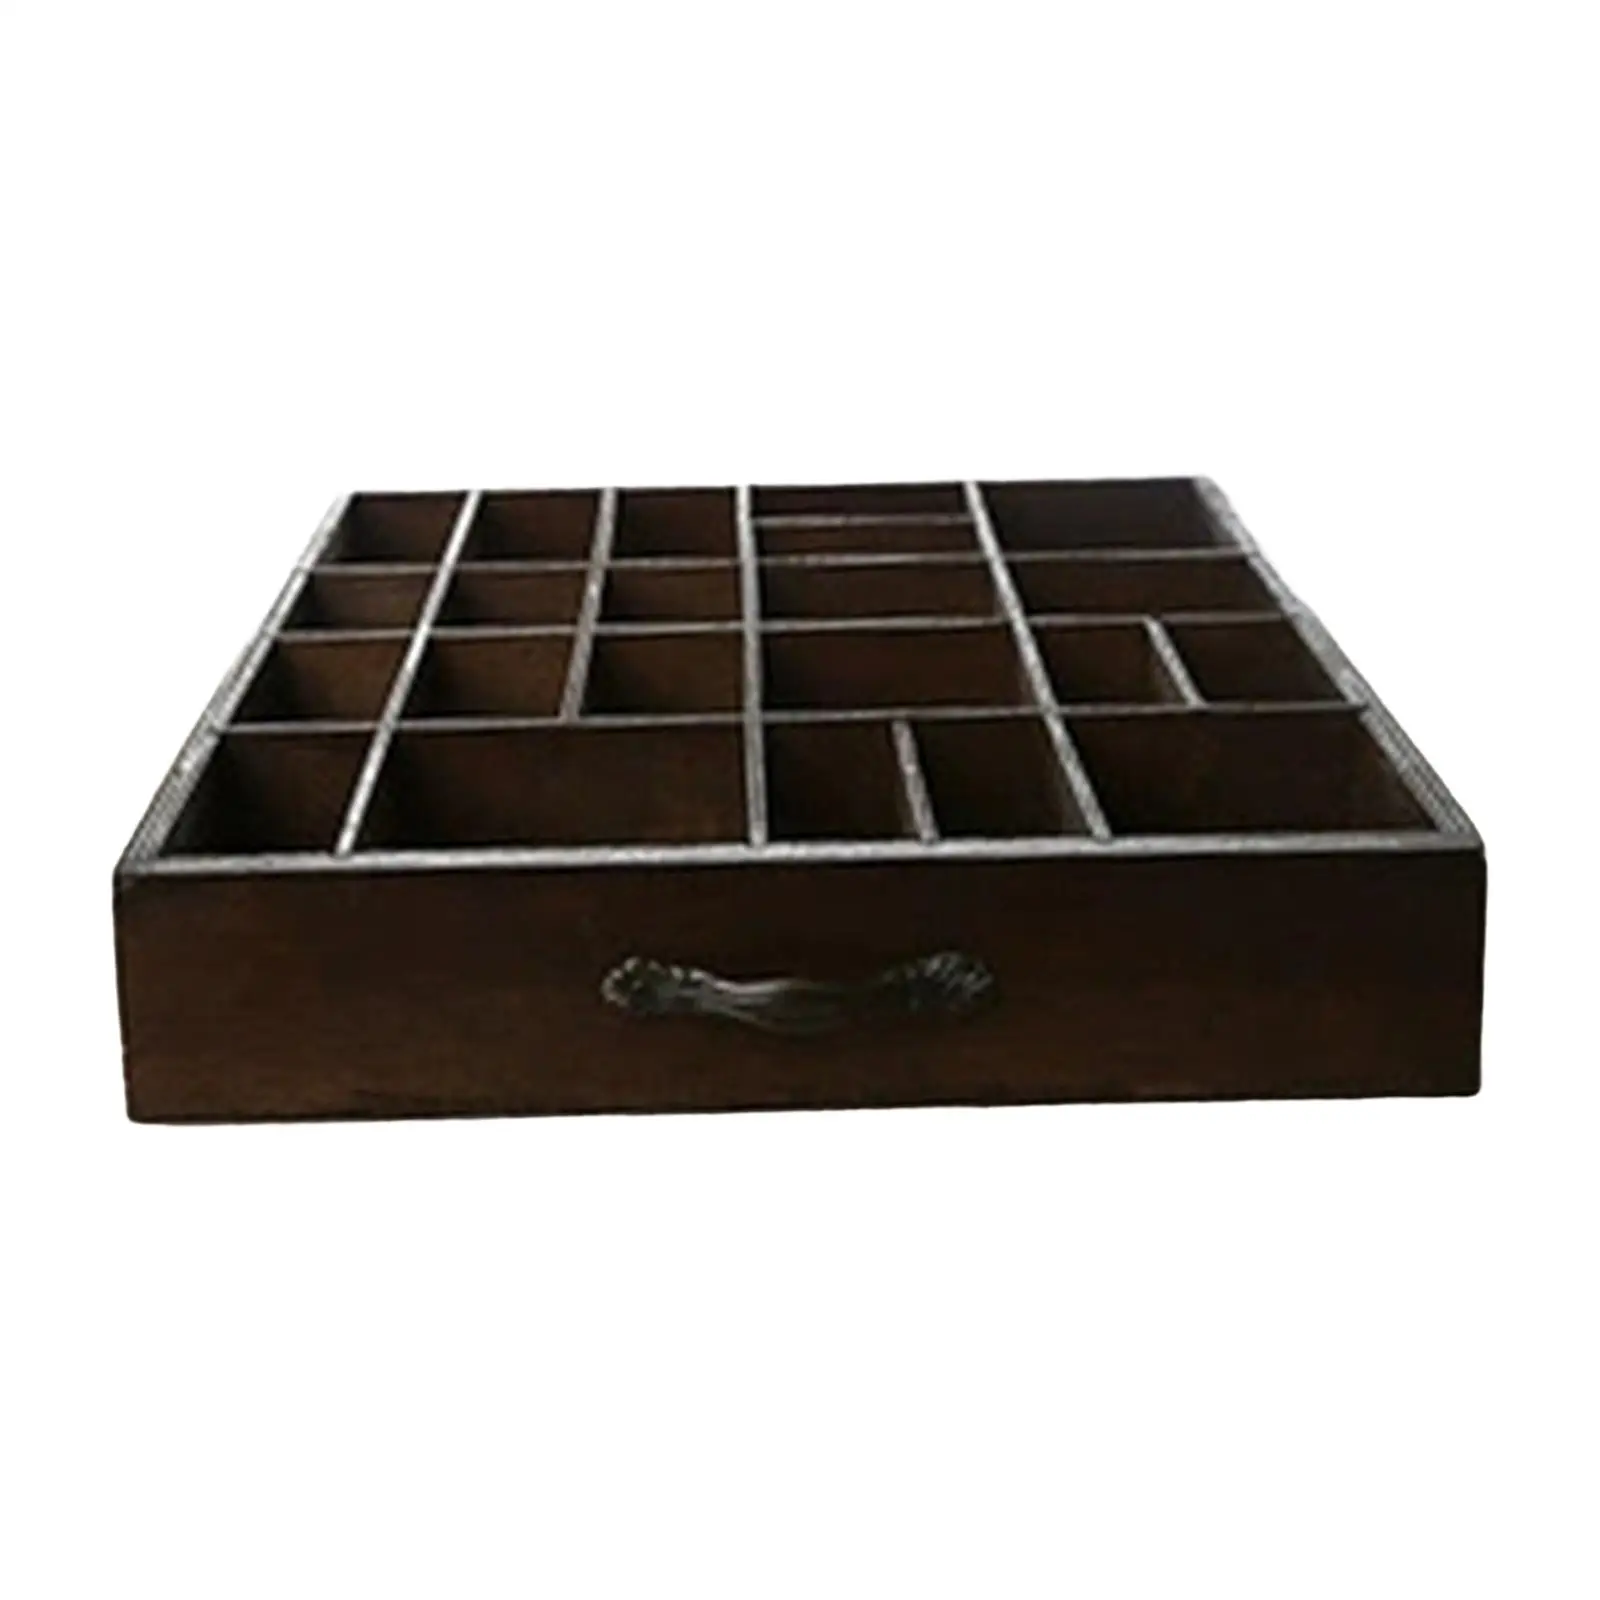 Wooden Drawer Organizer with Handle Drawer Storage Box Divided Tray for Kitchen Countertop Office Desktop Dresser Pantry